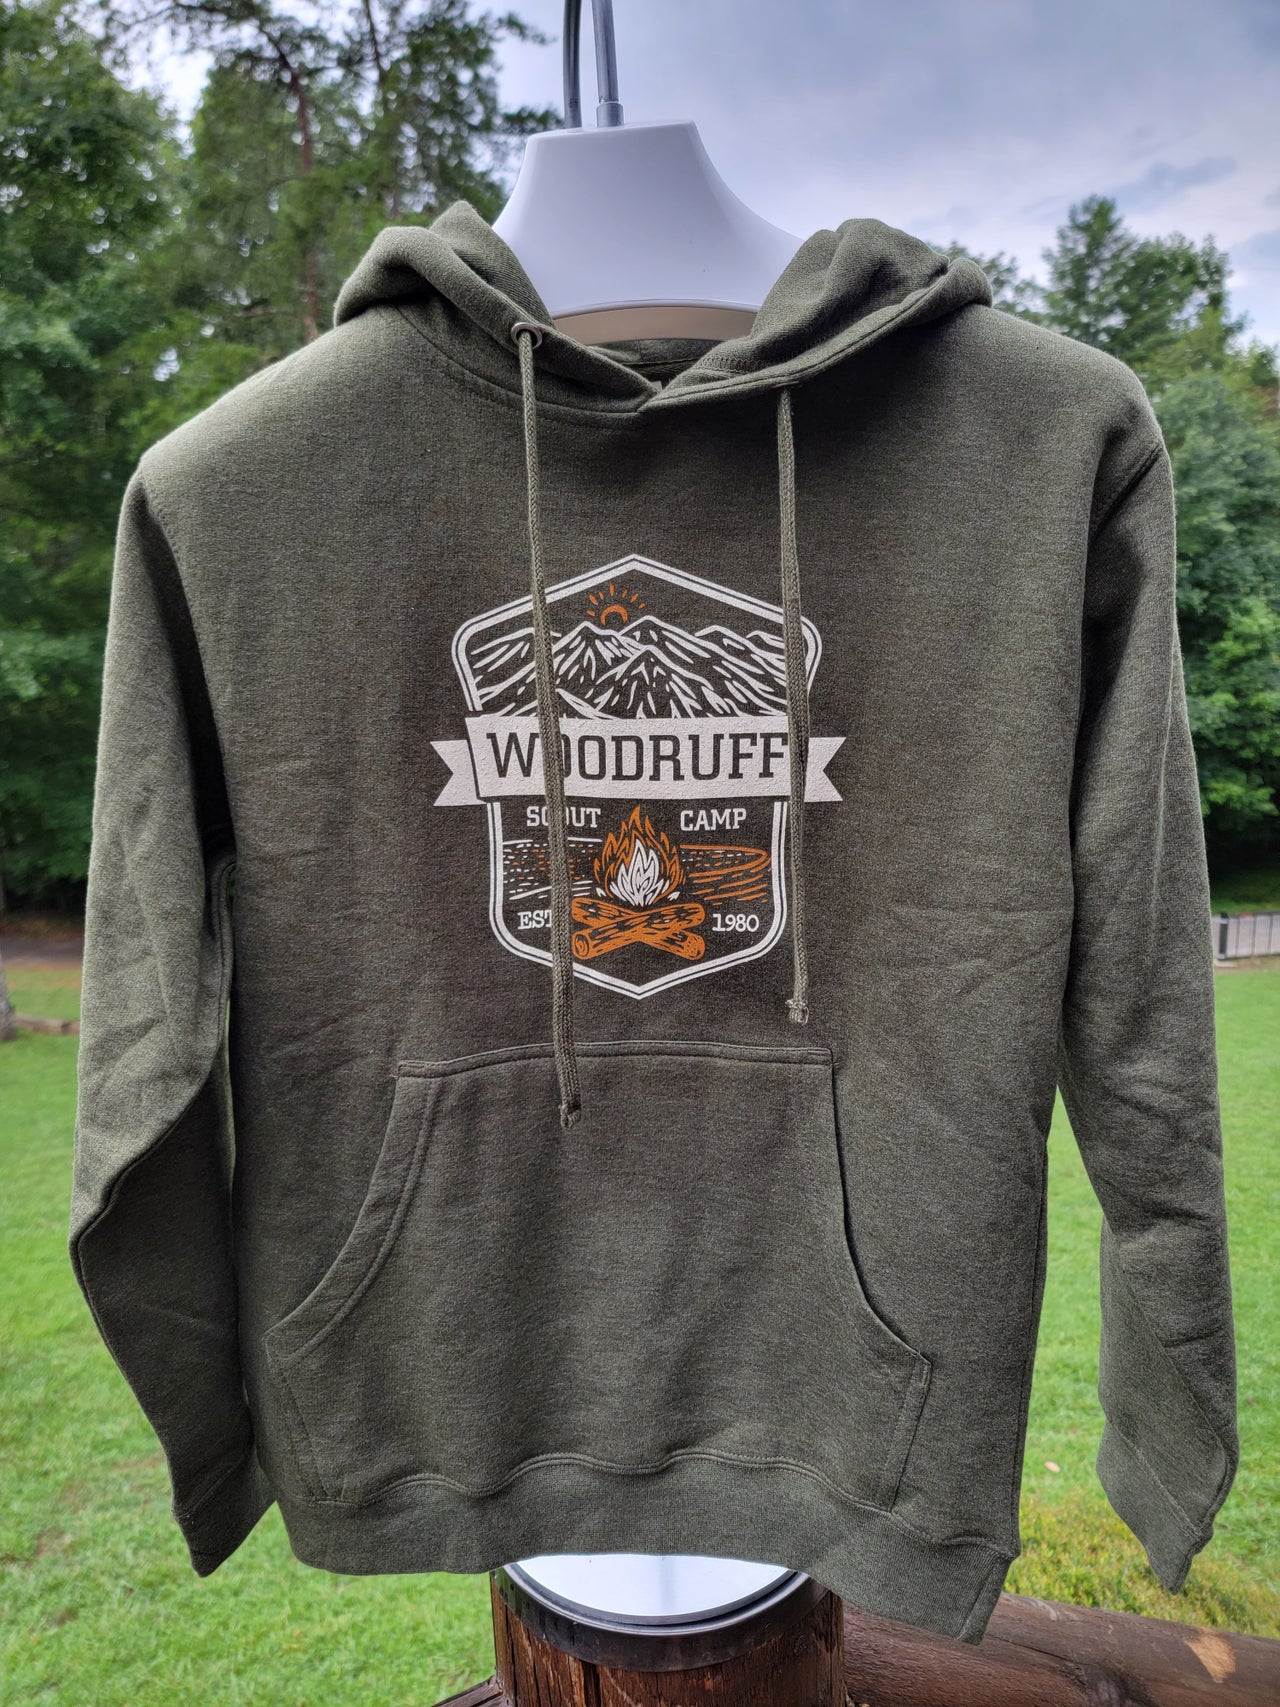 Shop All | Woodruff Scout Camp Trading Post